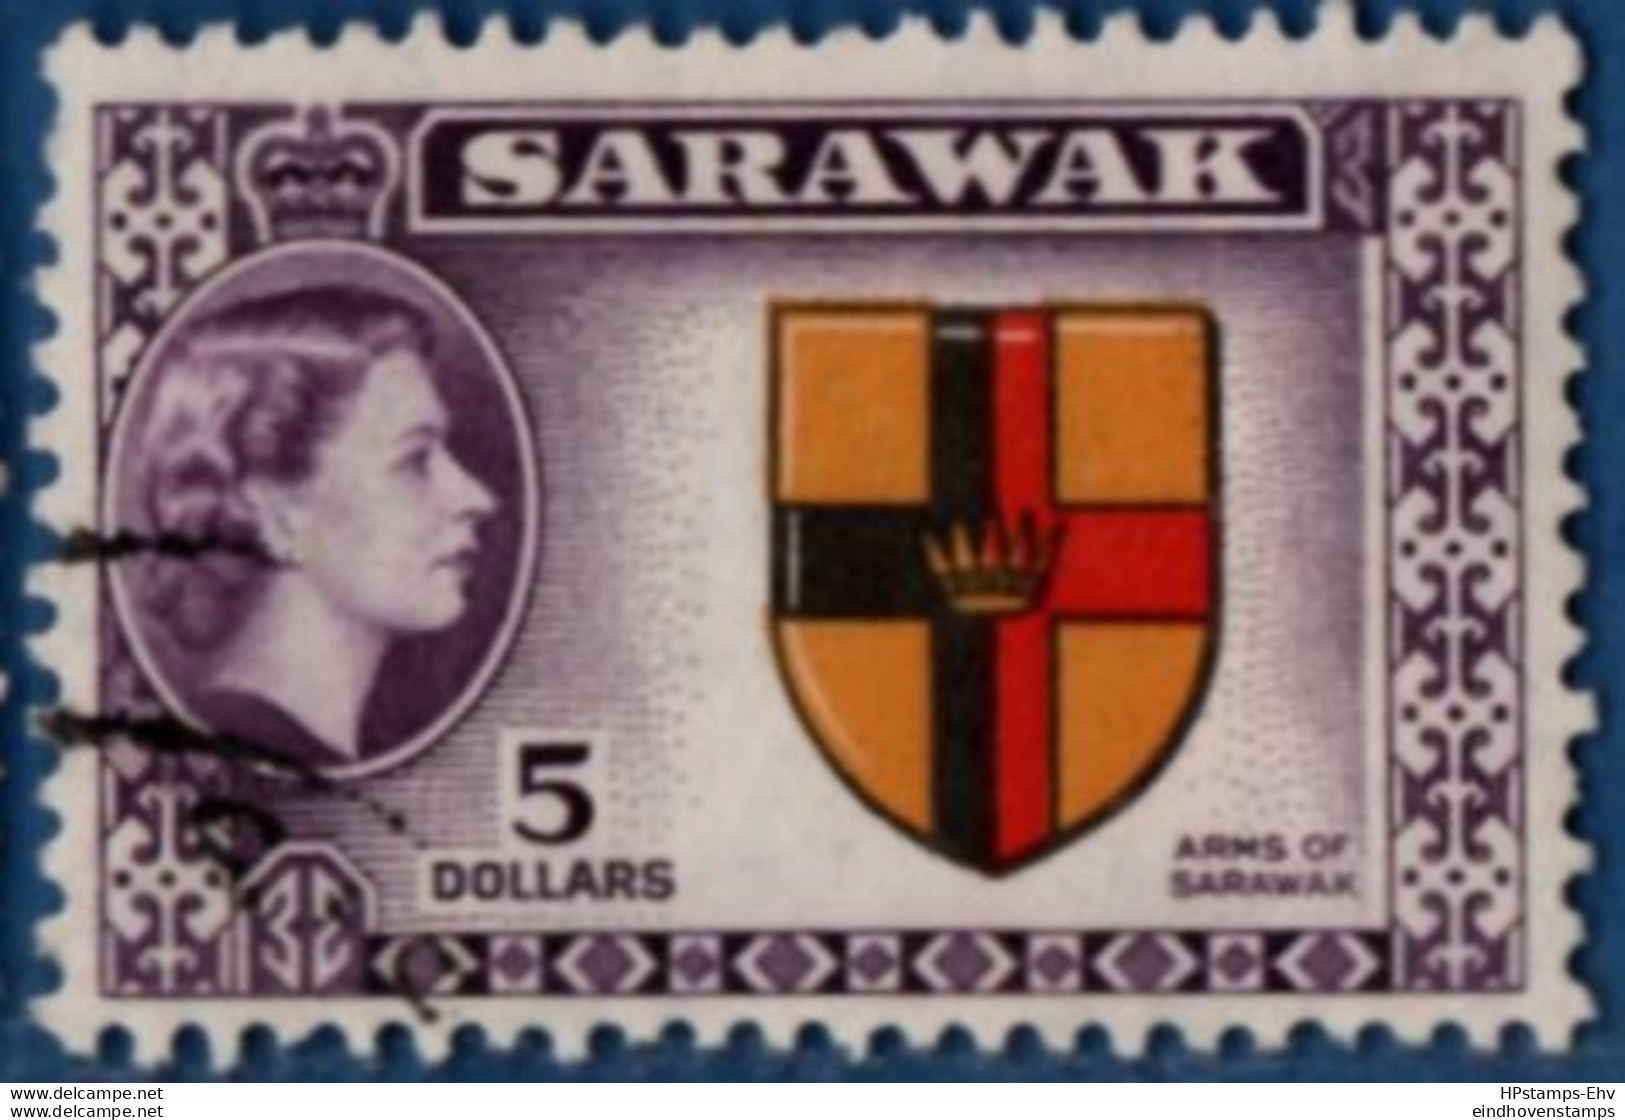 Sarawak Malaysia 1955 $ 5, Queen Elisaneth II & Country Arms 1 Stamp Cancelled 2106.0646 - Sarawak (...-1963)